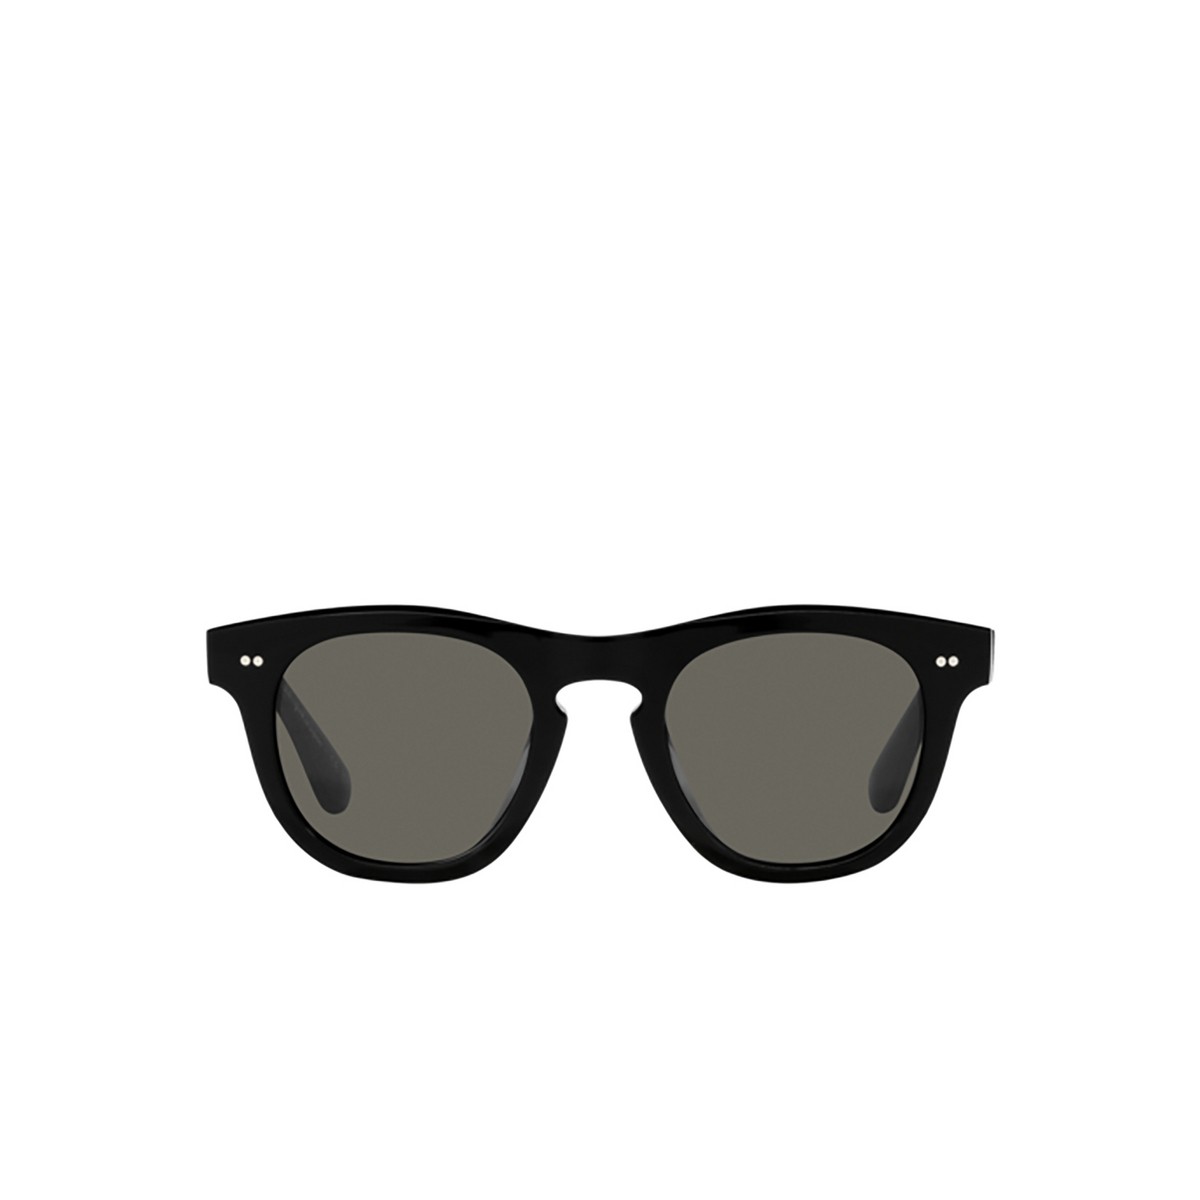 Oliver Peoples RORKE Sunglasses 1731R5 Black - front view